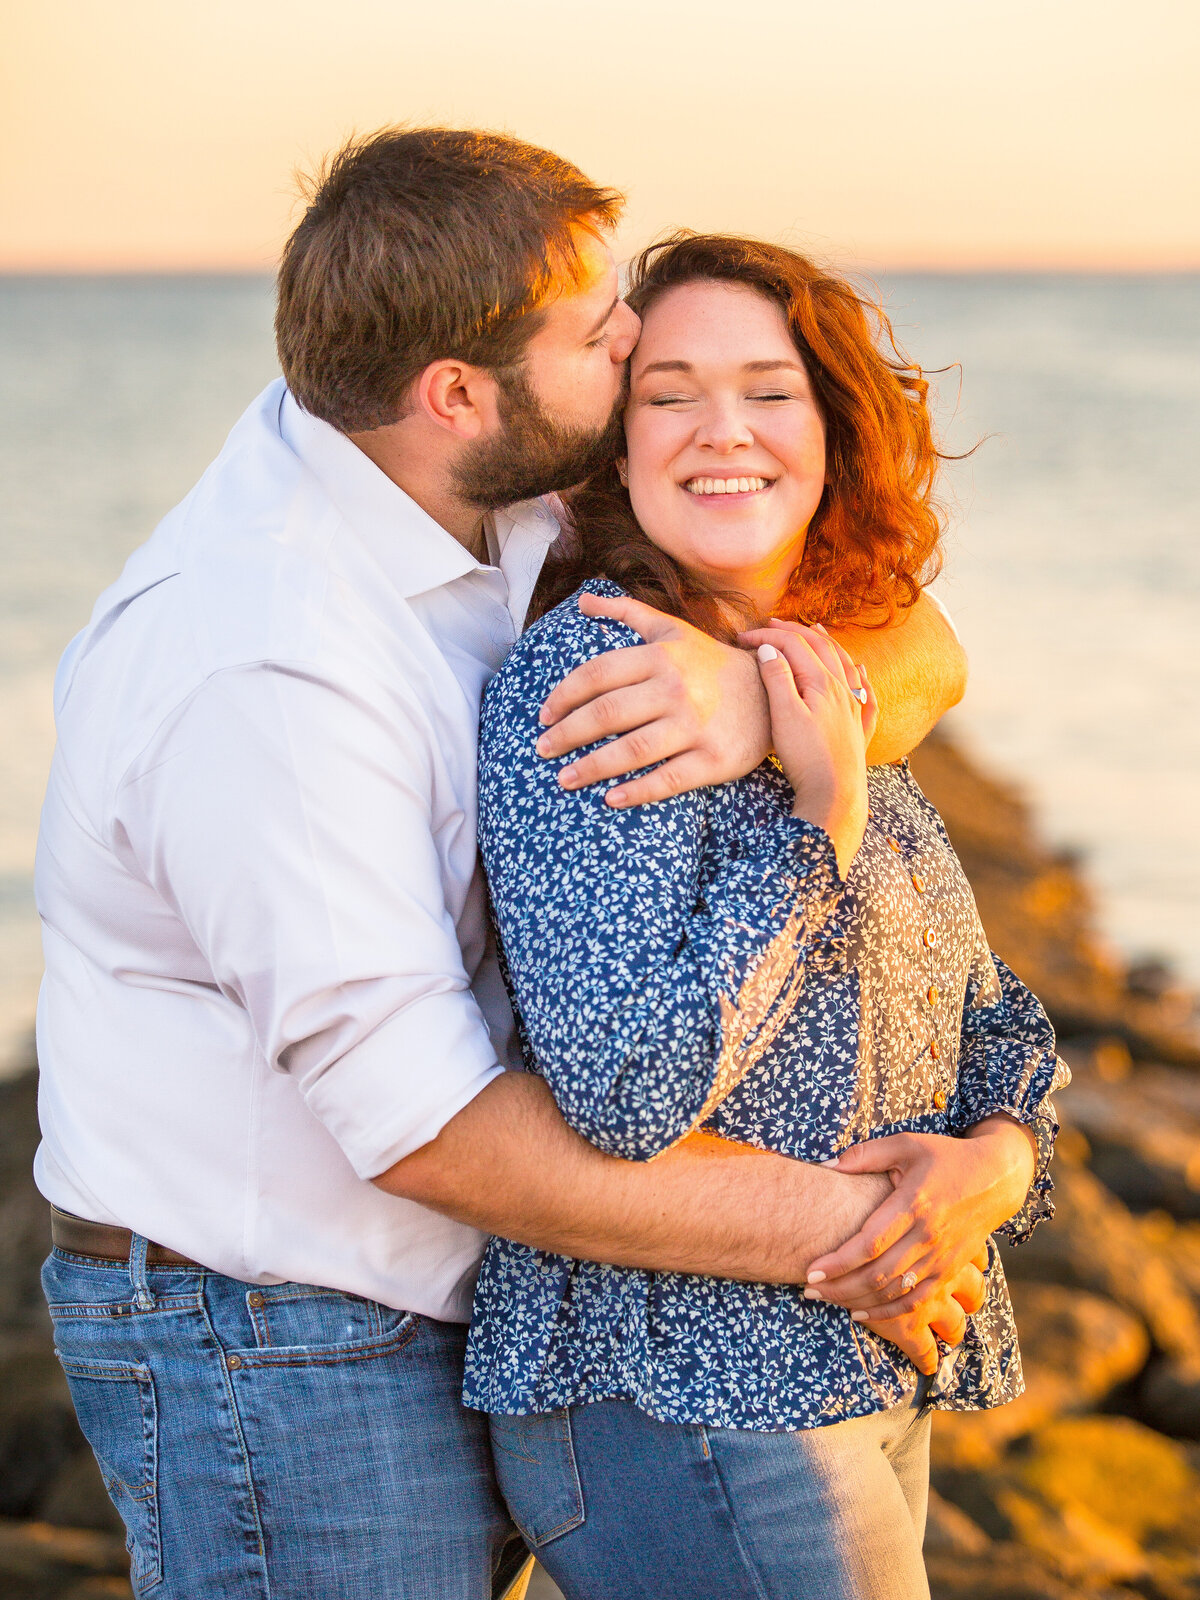 Woman laughs as her fiancé hugs her from behind and kisses her cheek during their engagement session.